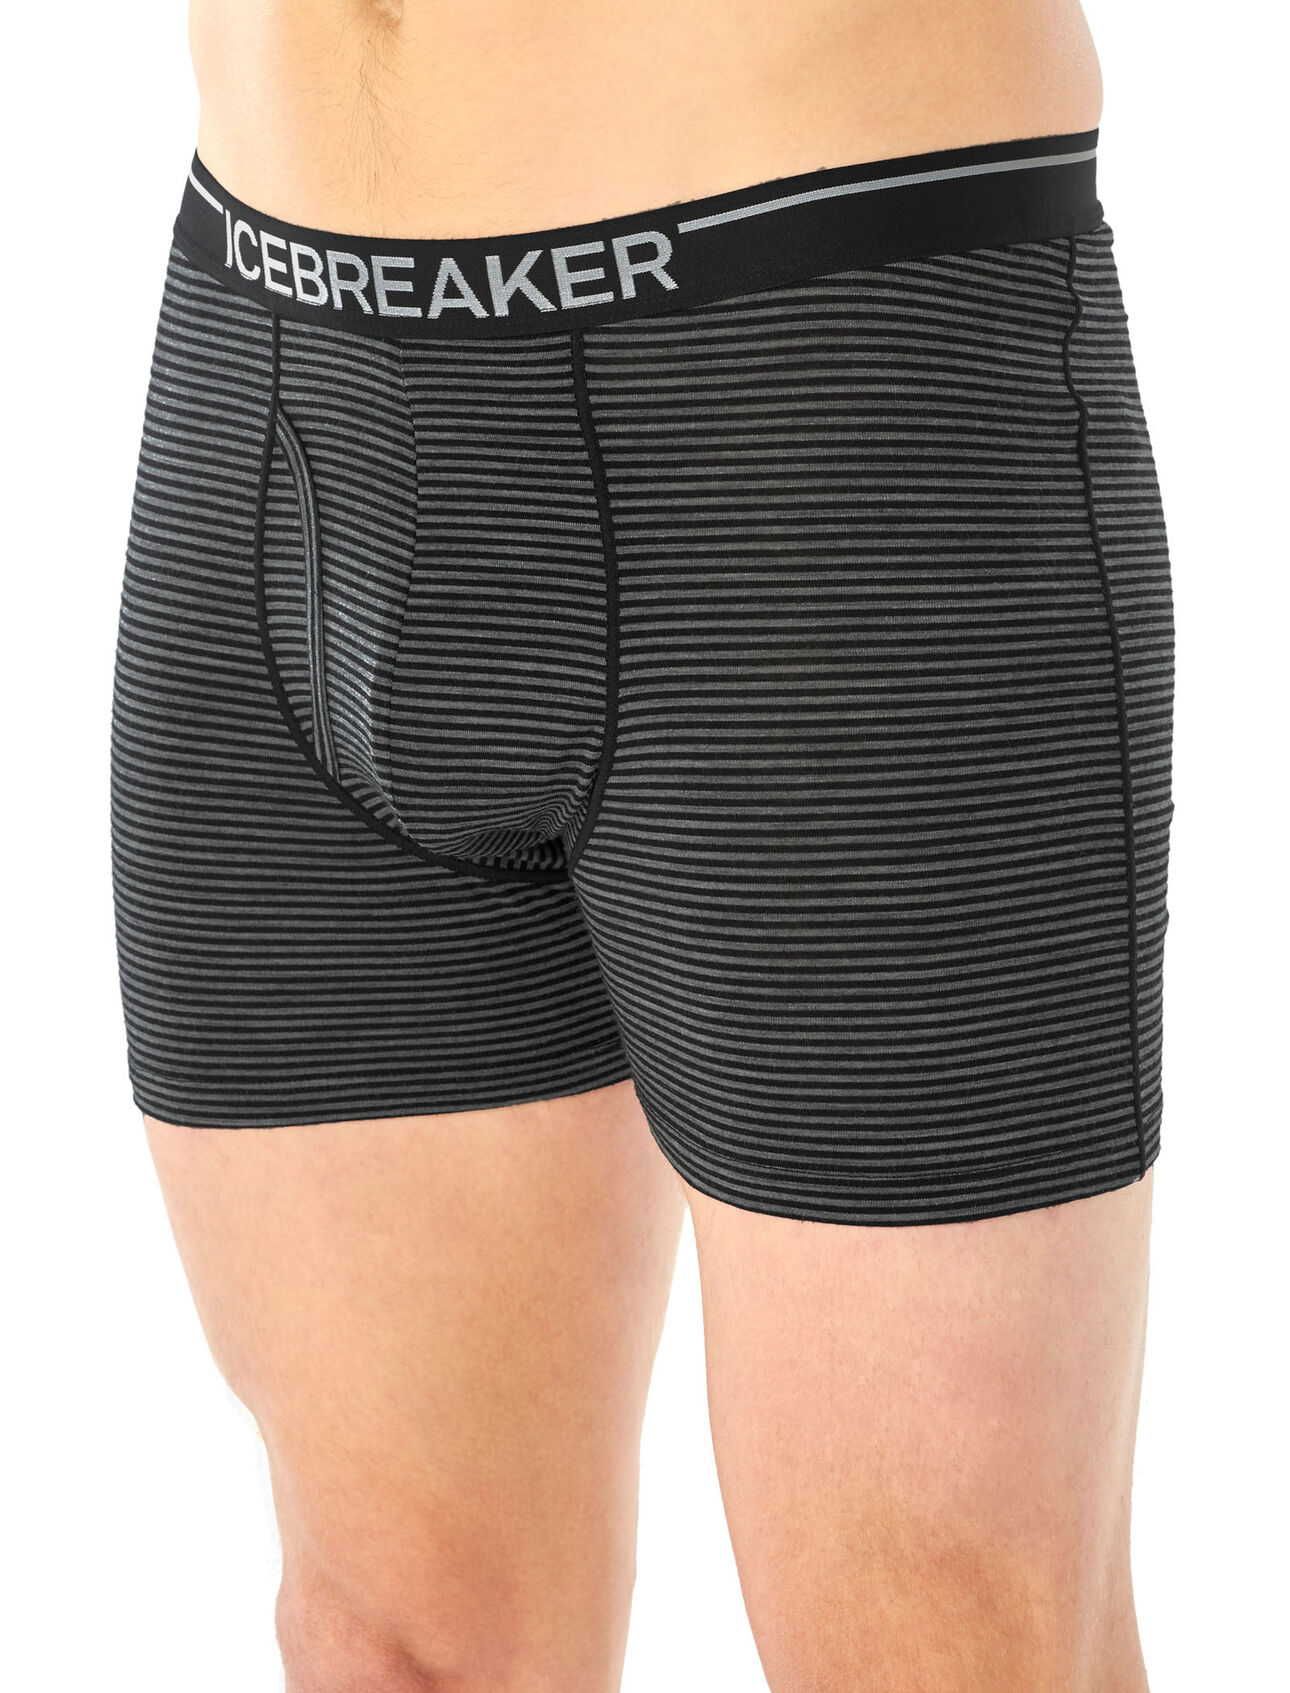 Merino Anatomica Boxers With Fly 3 Pack - Icebreaker (US)